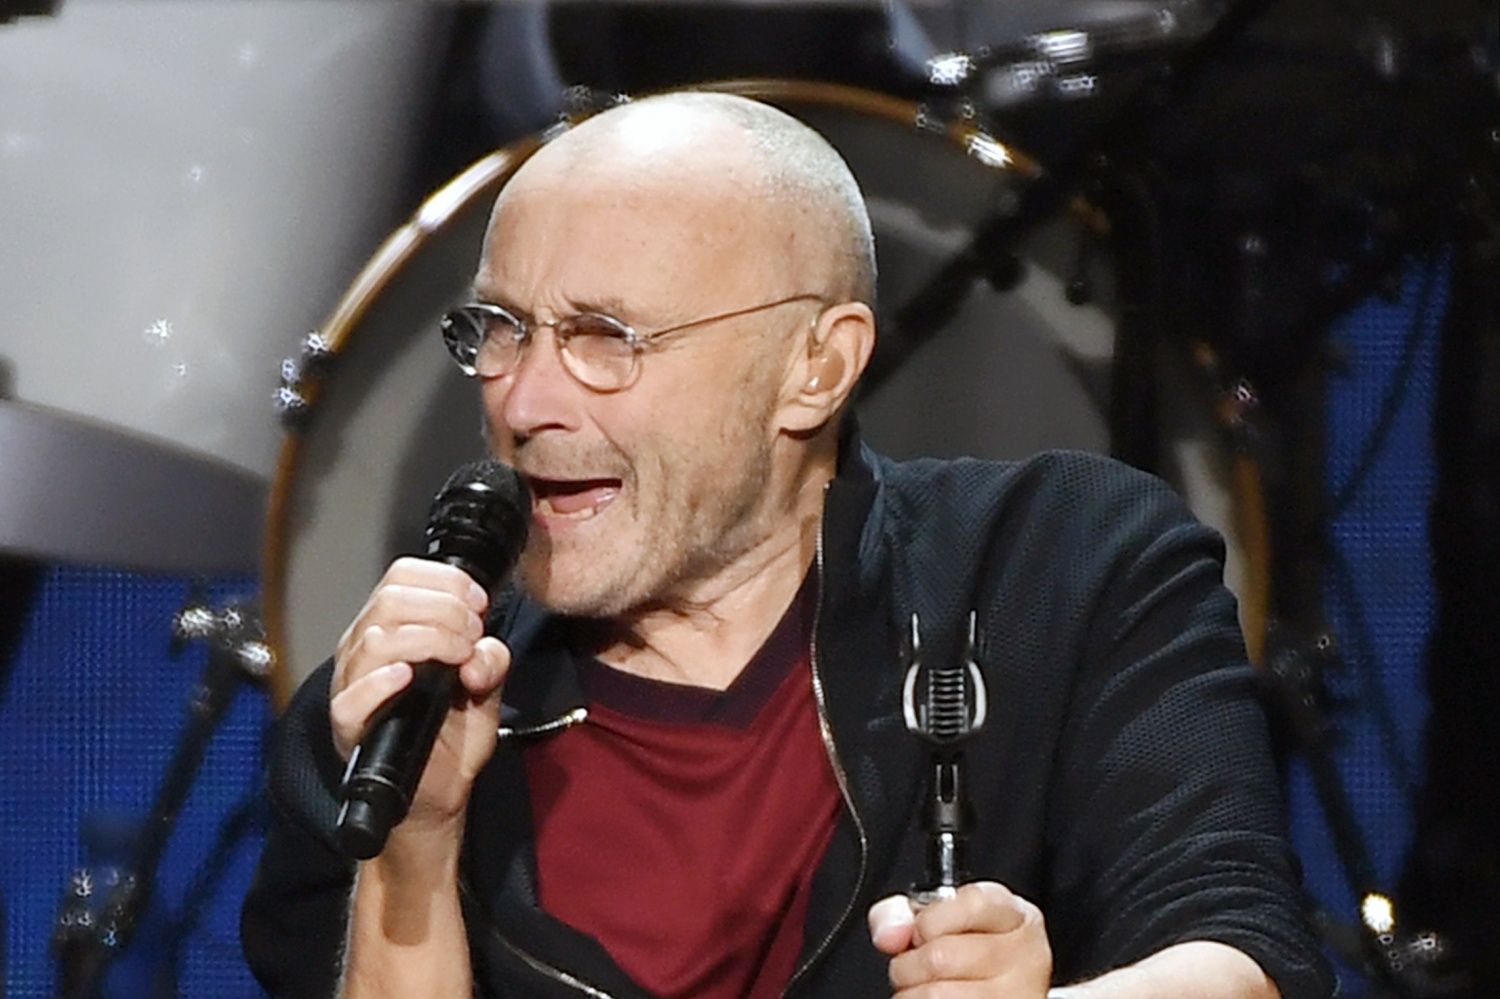 Phil Collins' Heartbreak Led Him To One of His Biggest Hits — 'In the Air Tonight' Meaning Explained